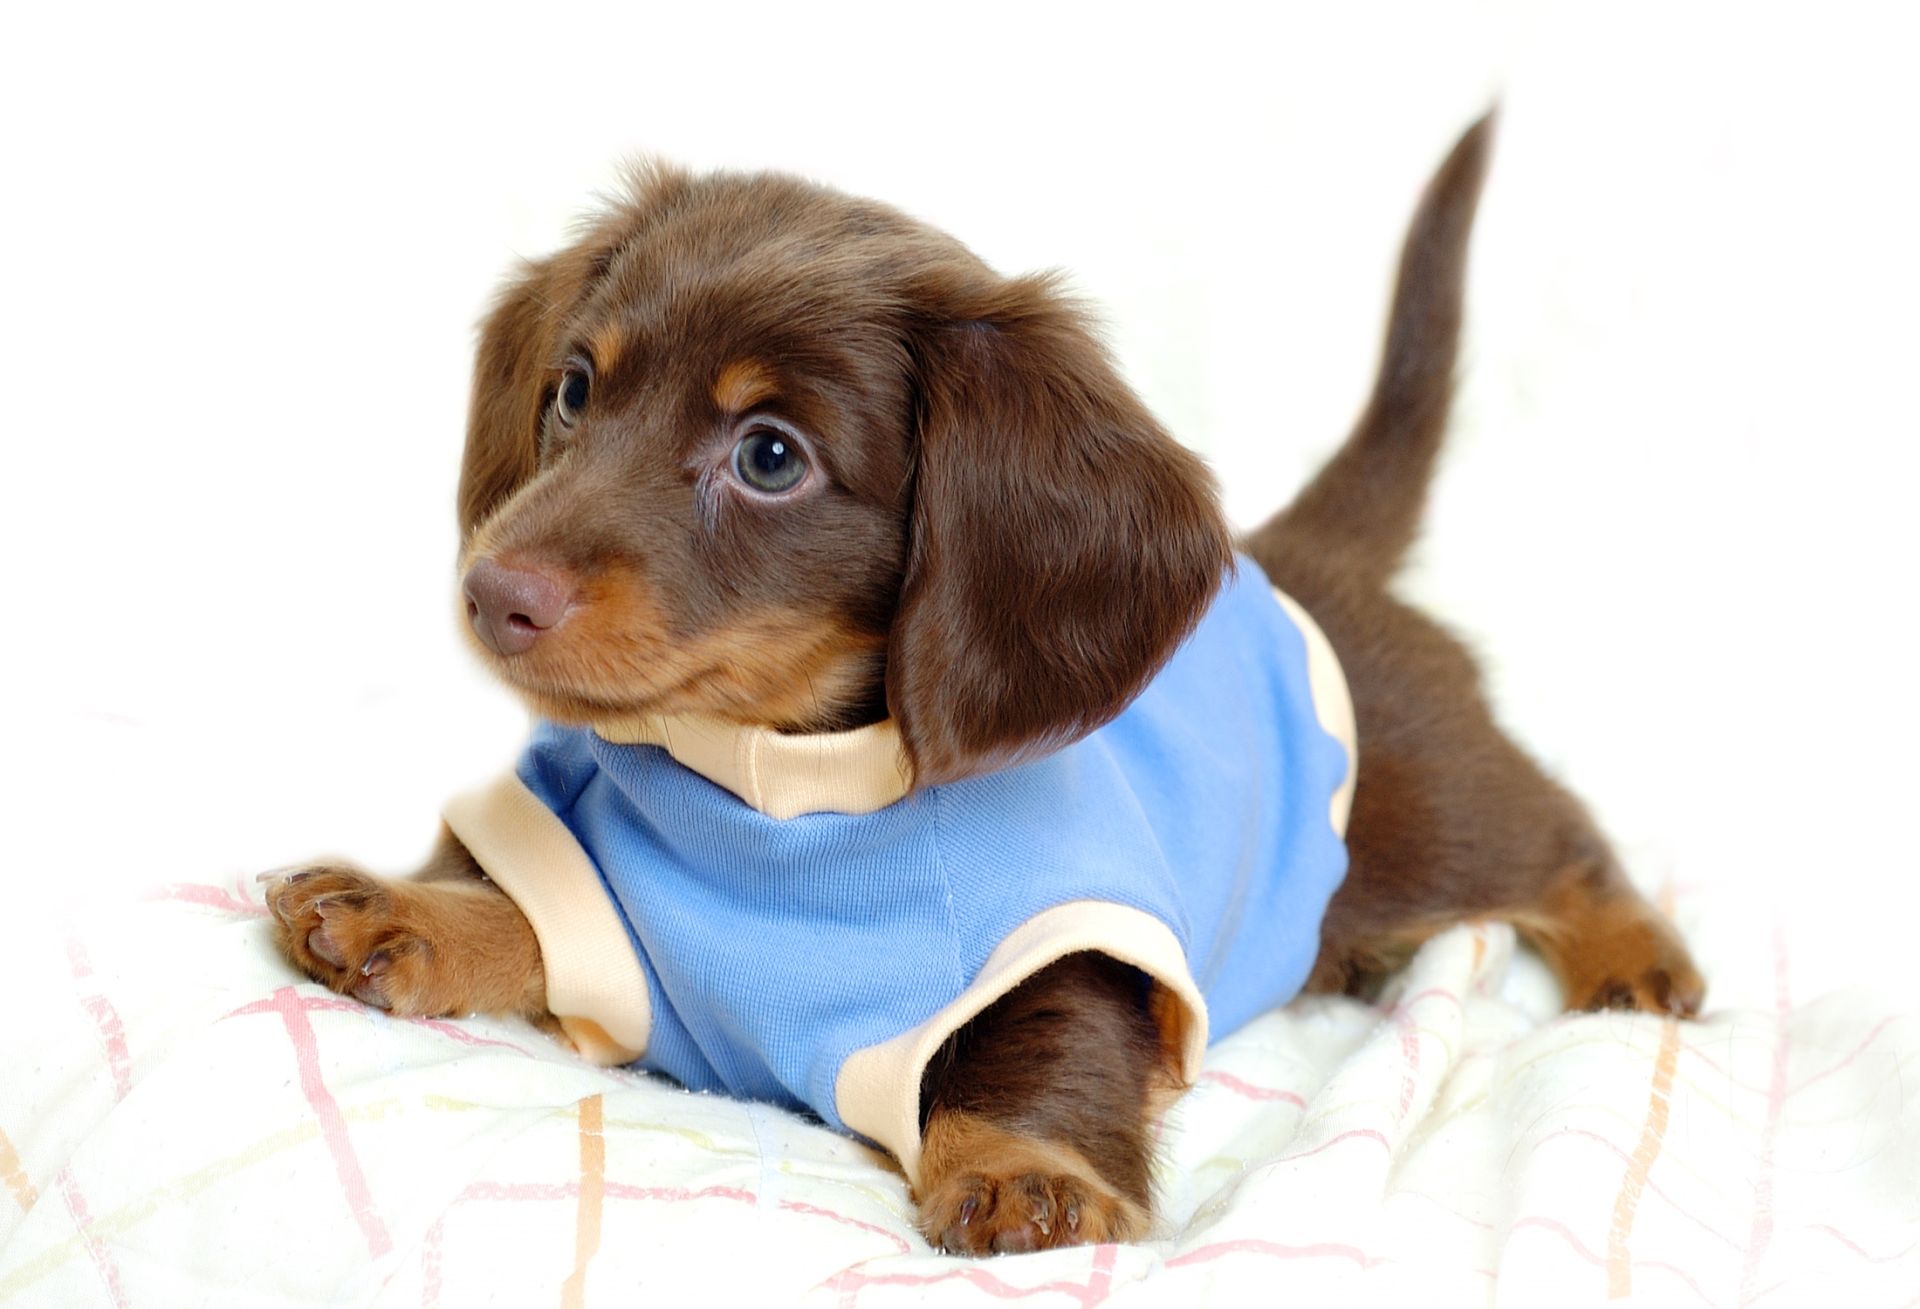 Cute Baby Dogs Wallpapers